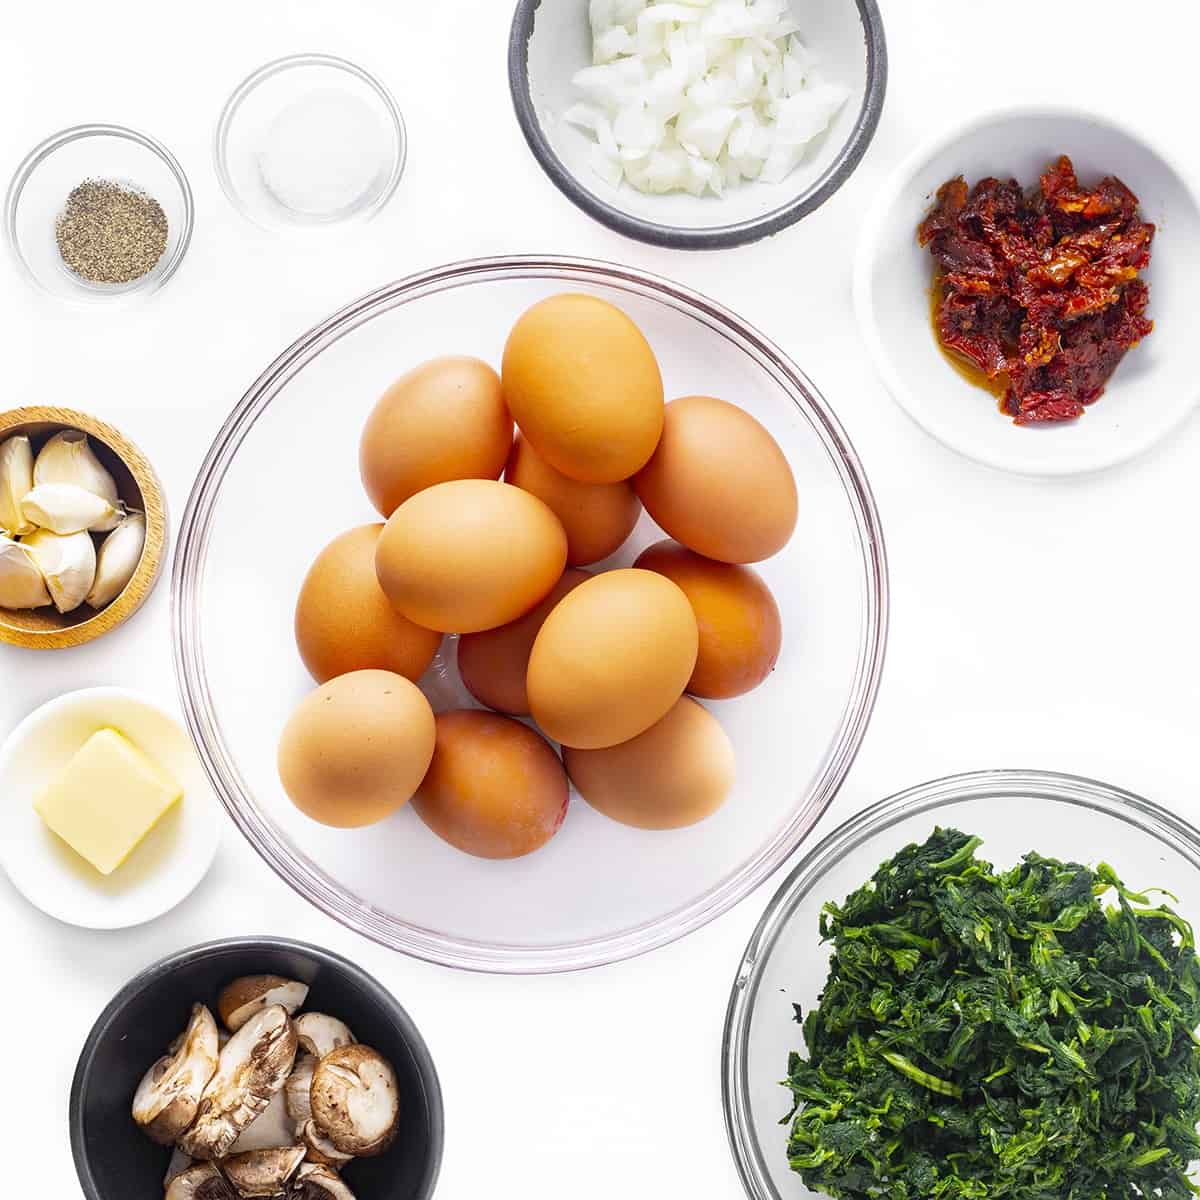 Ingredients to make baked eggs with veggies.